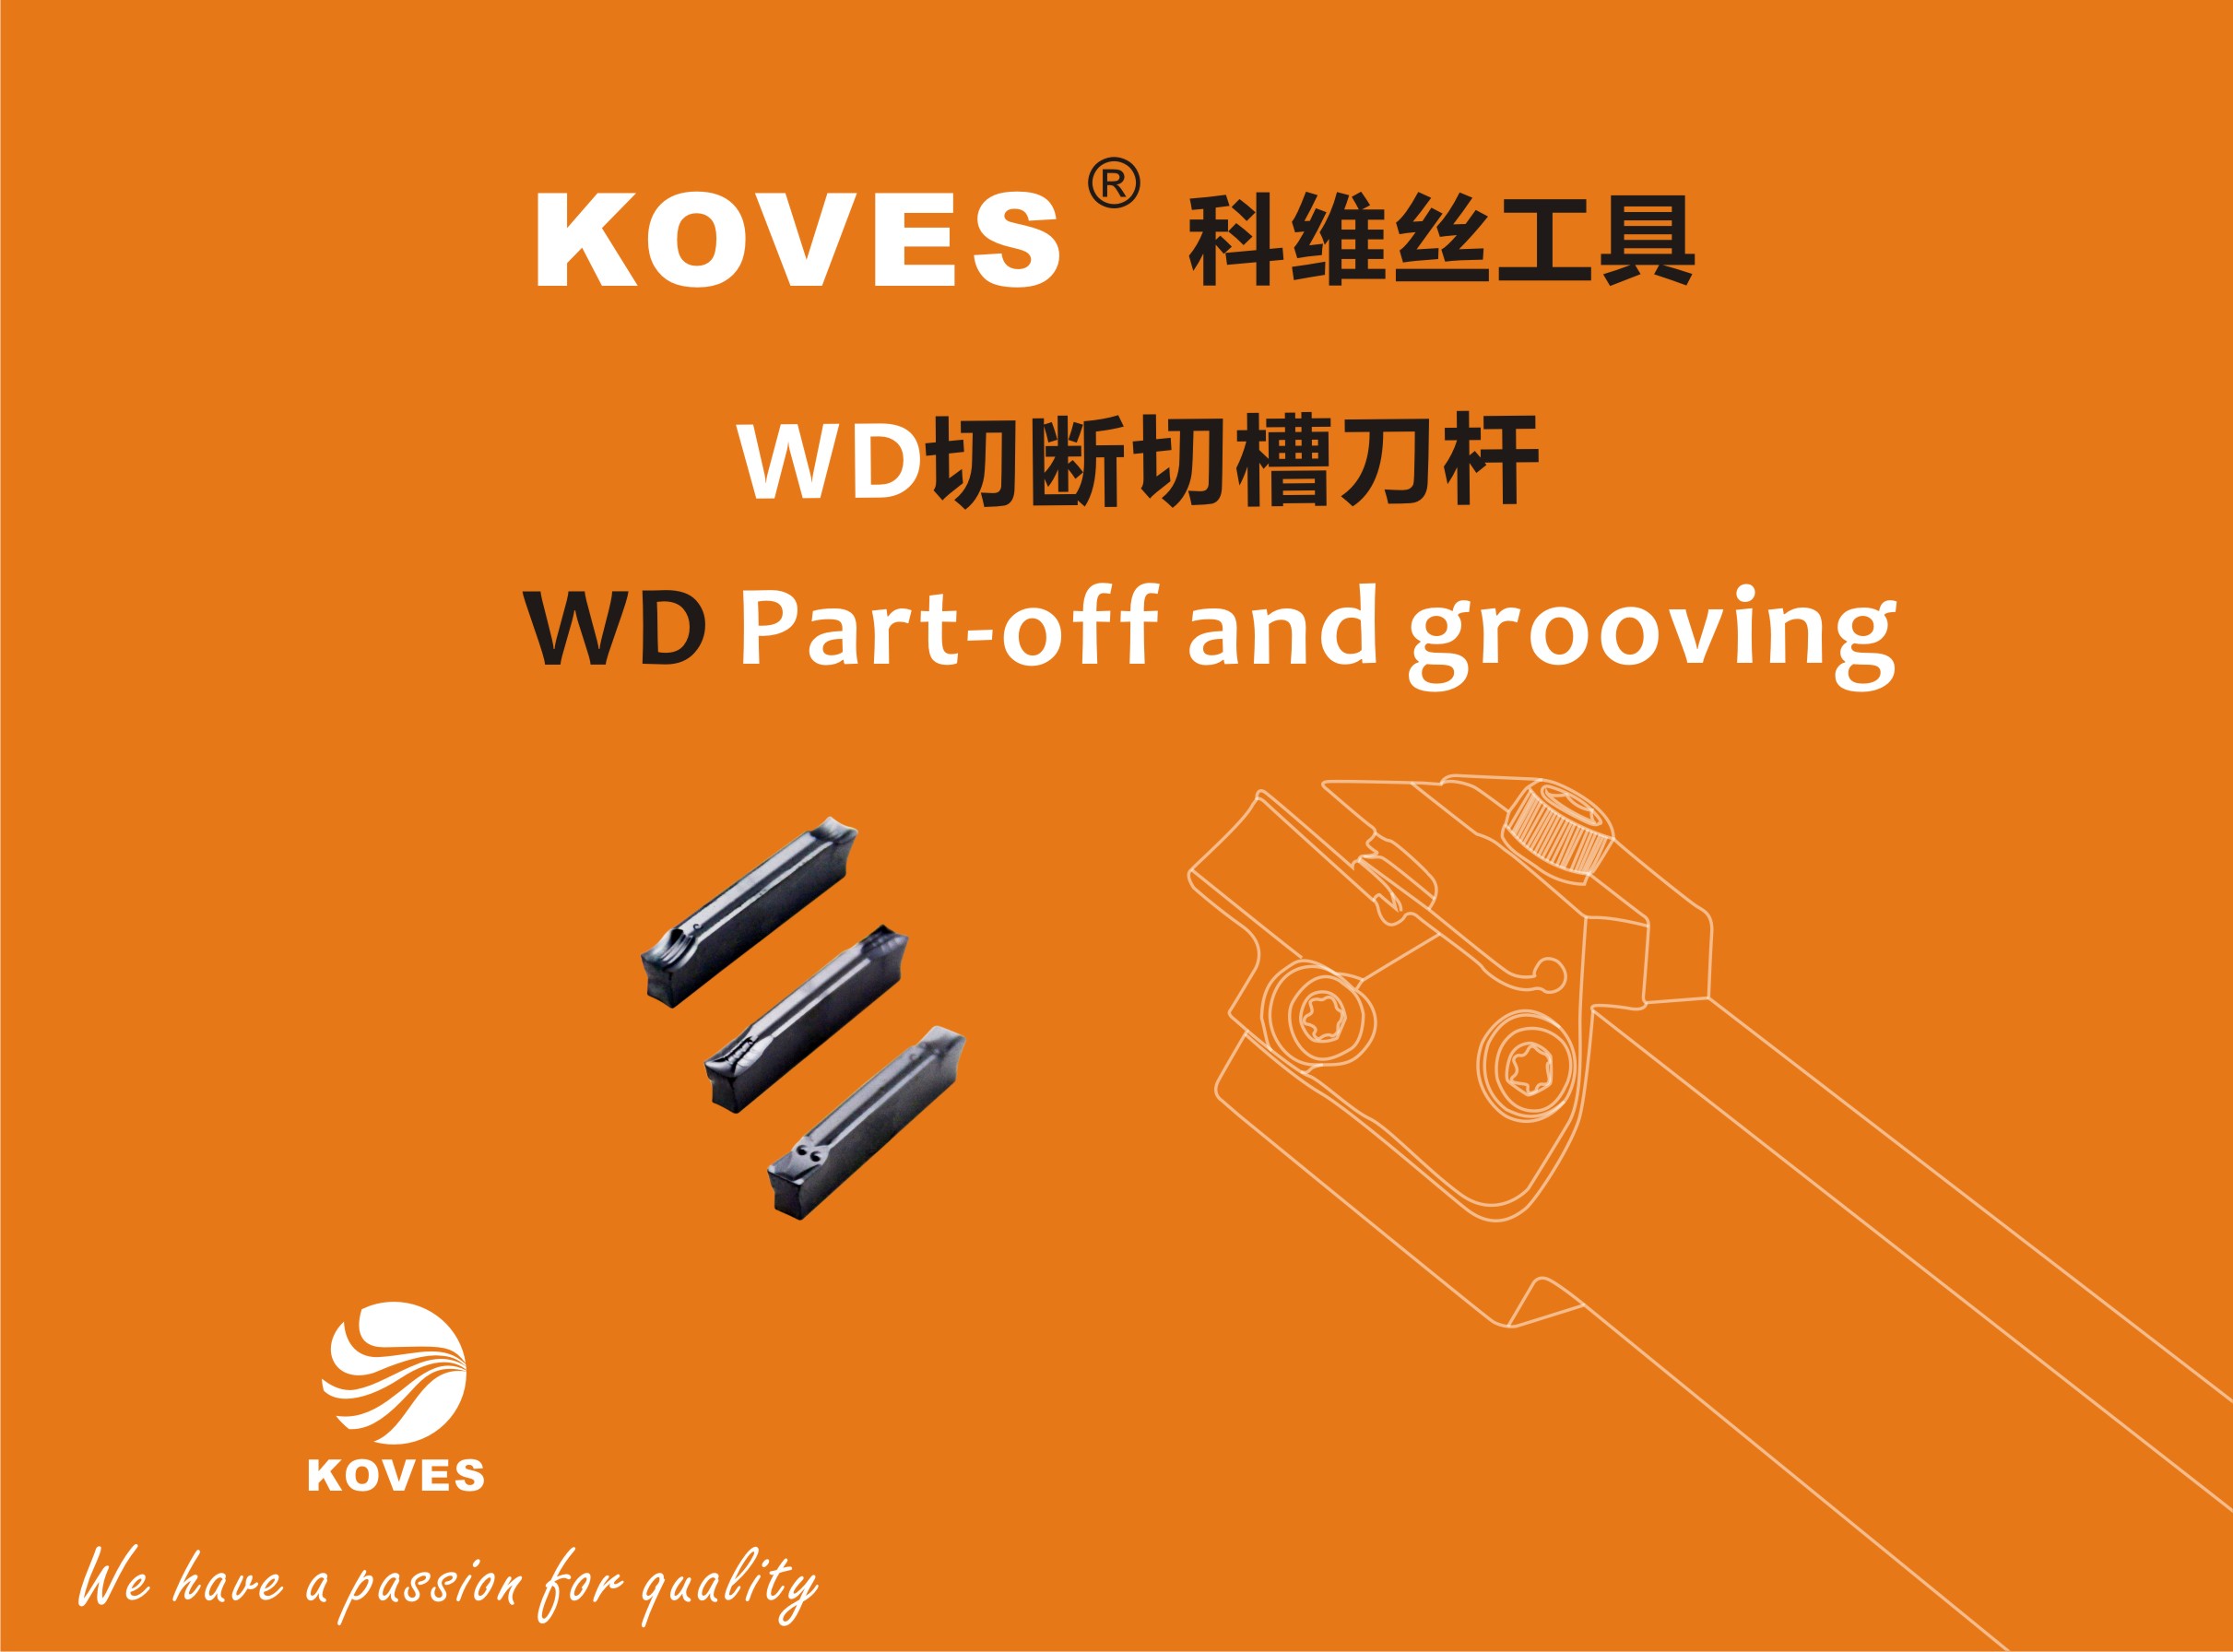 <b>WD Moular Parting And Grooving Tools</b>